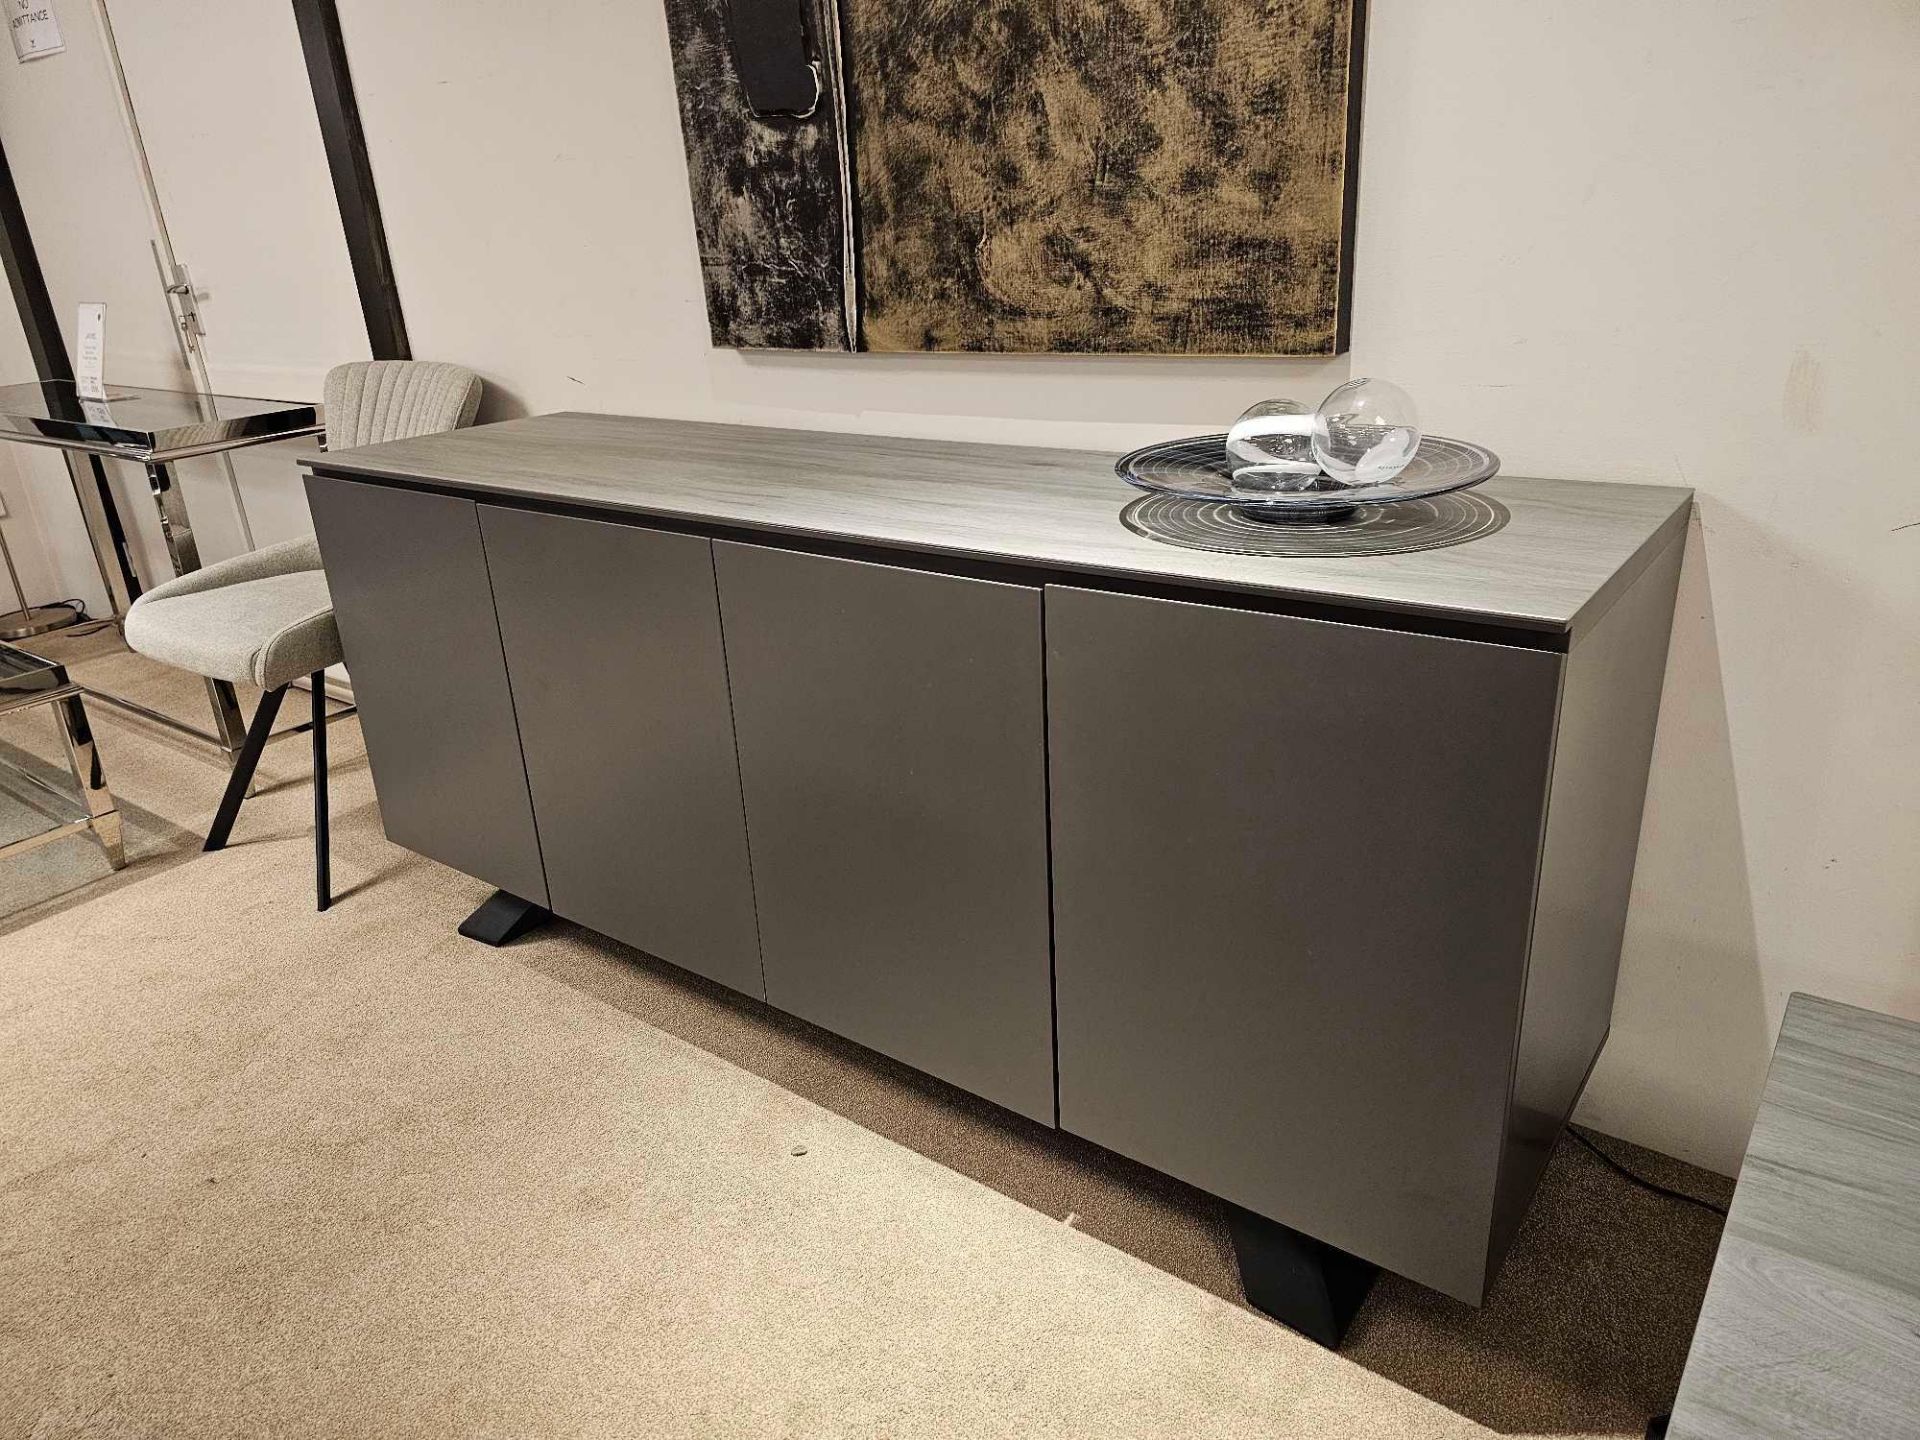 Spartan Sideboard by Kesterport The Spartan Four Door Sideboard provides is striking as a stand - Bild 4 aus 12